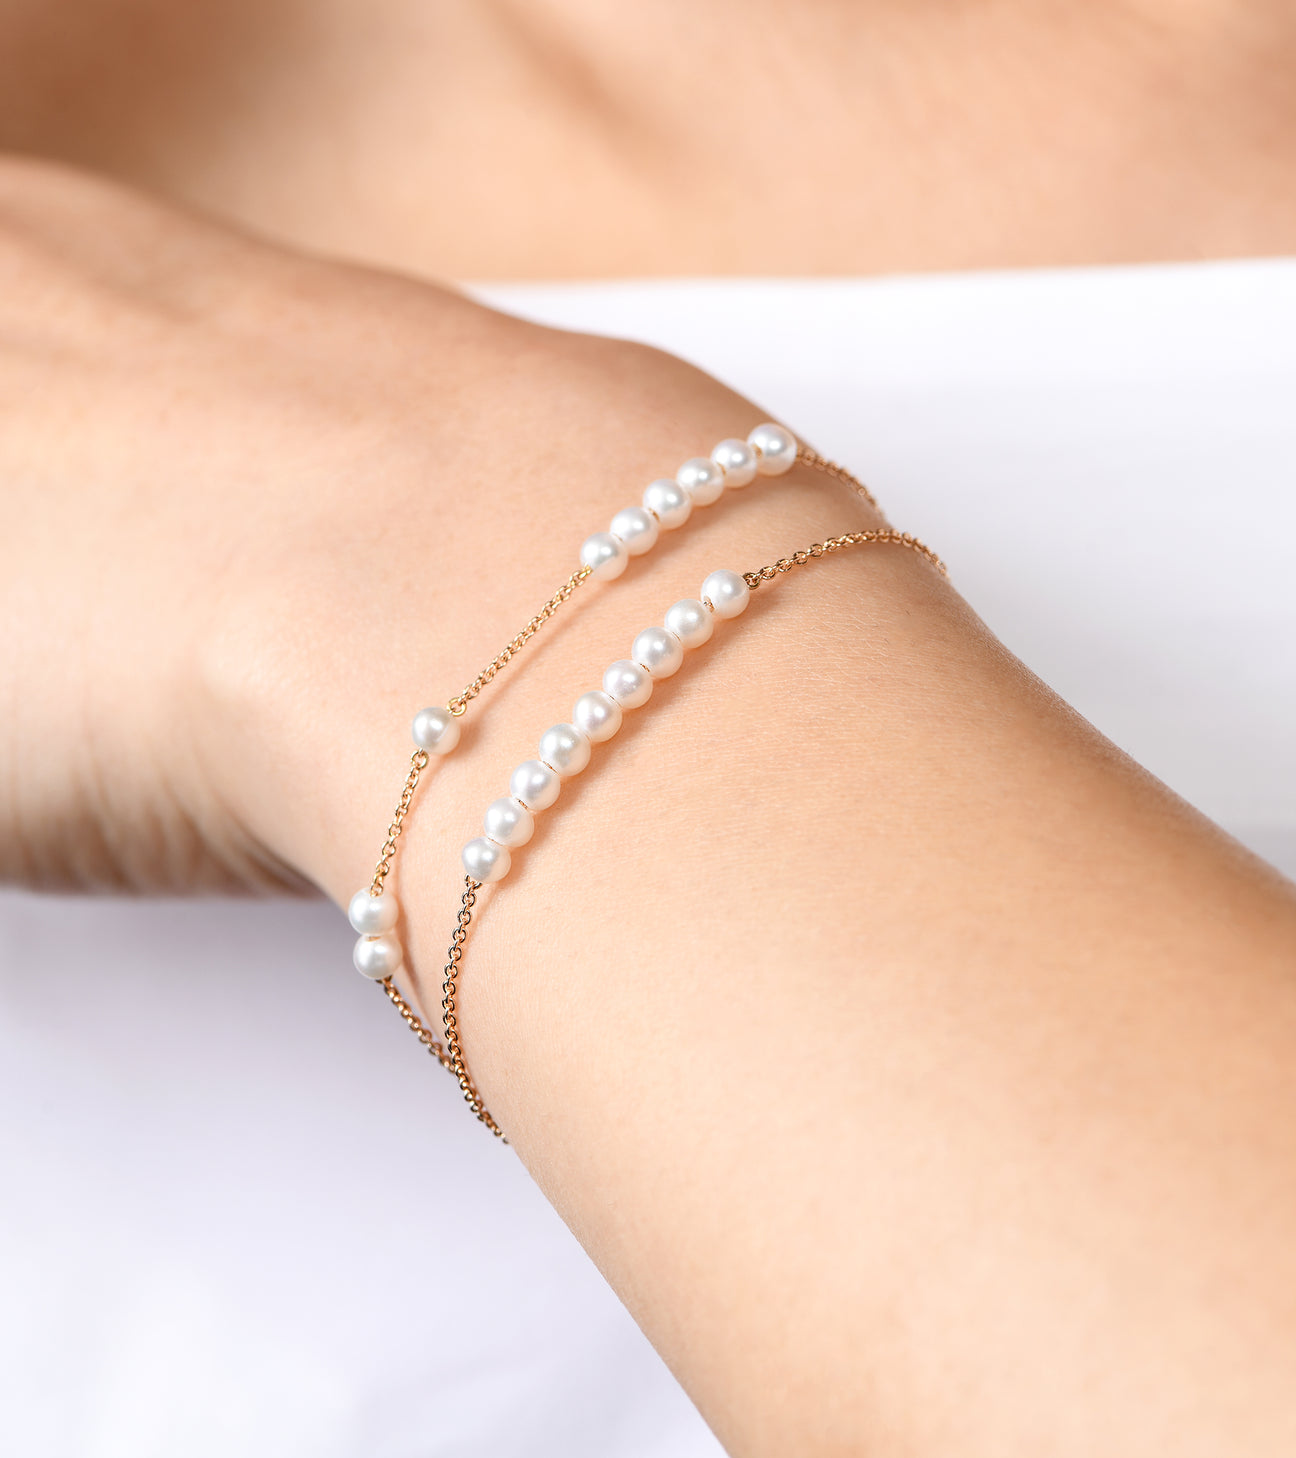 PURE PEARLS: ROMANTIC AND DELICATE